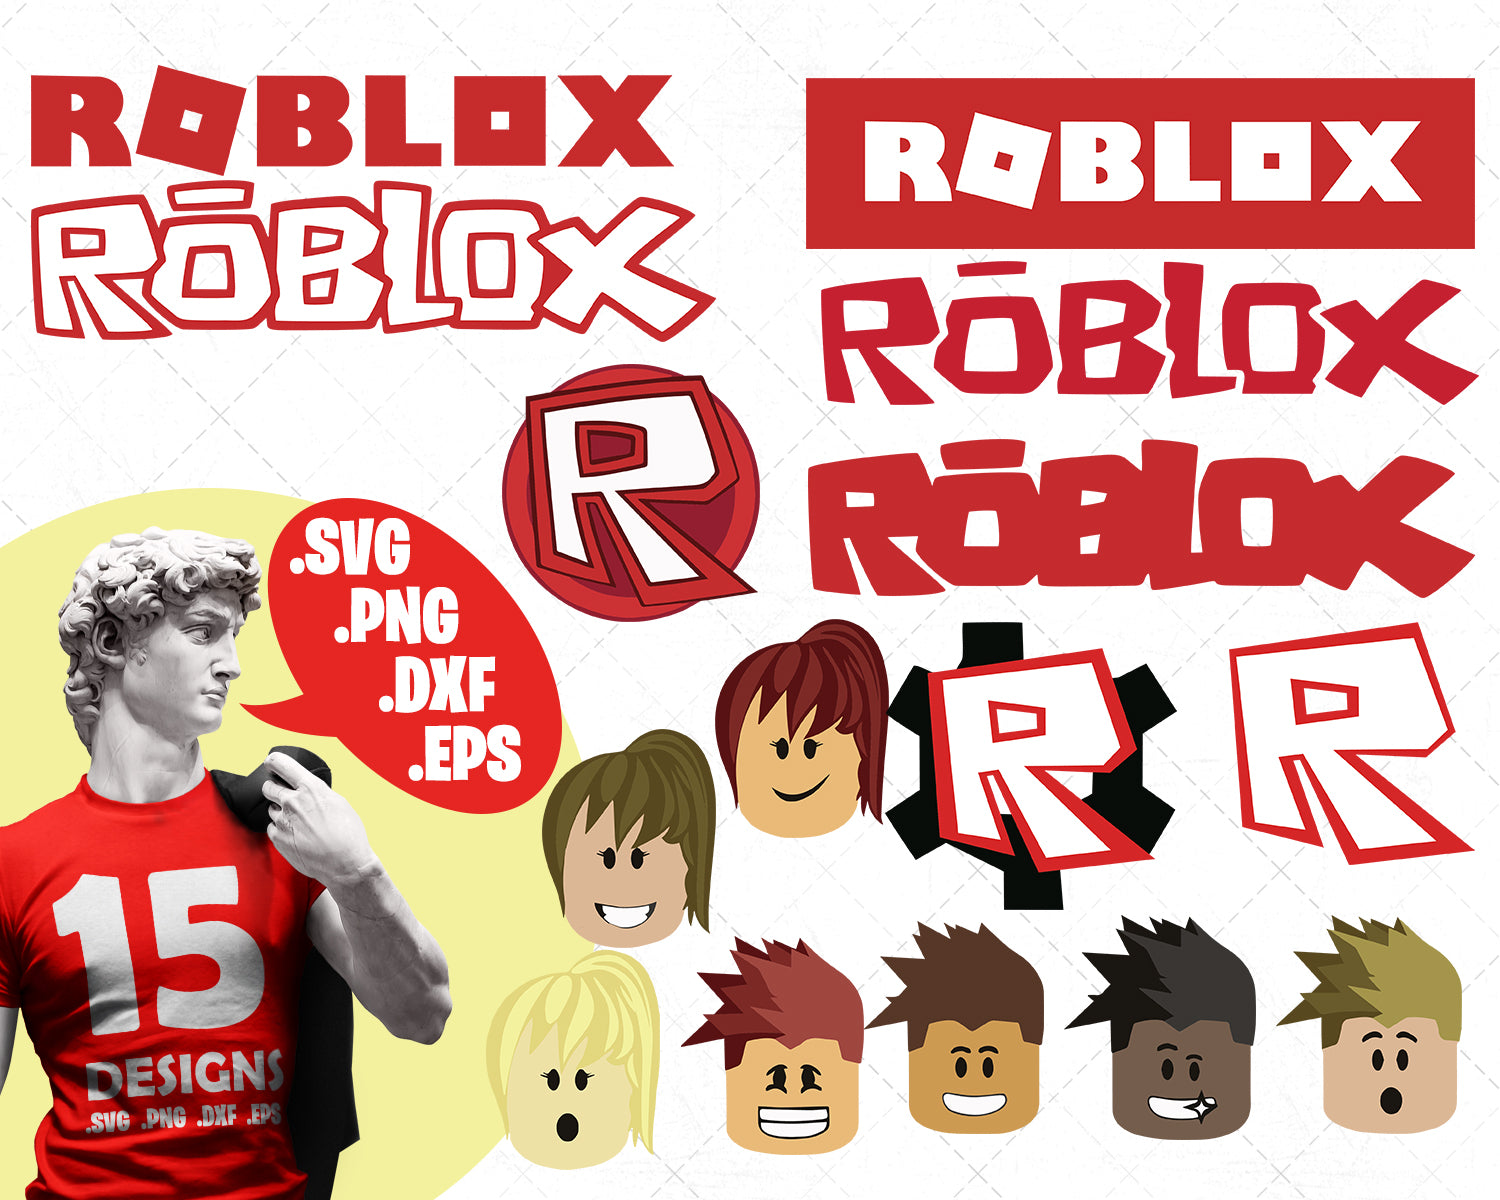 Roblox Svg Roblox Alphabet Svg Roblox Font Svg Roblox Letter Roblo Svg Designs For Cutting And Printing - transparent roblox logo svg